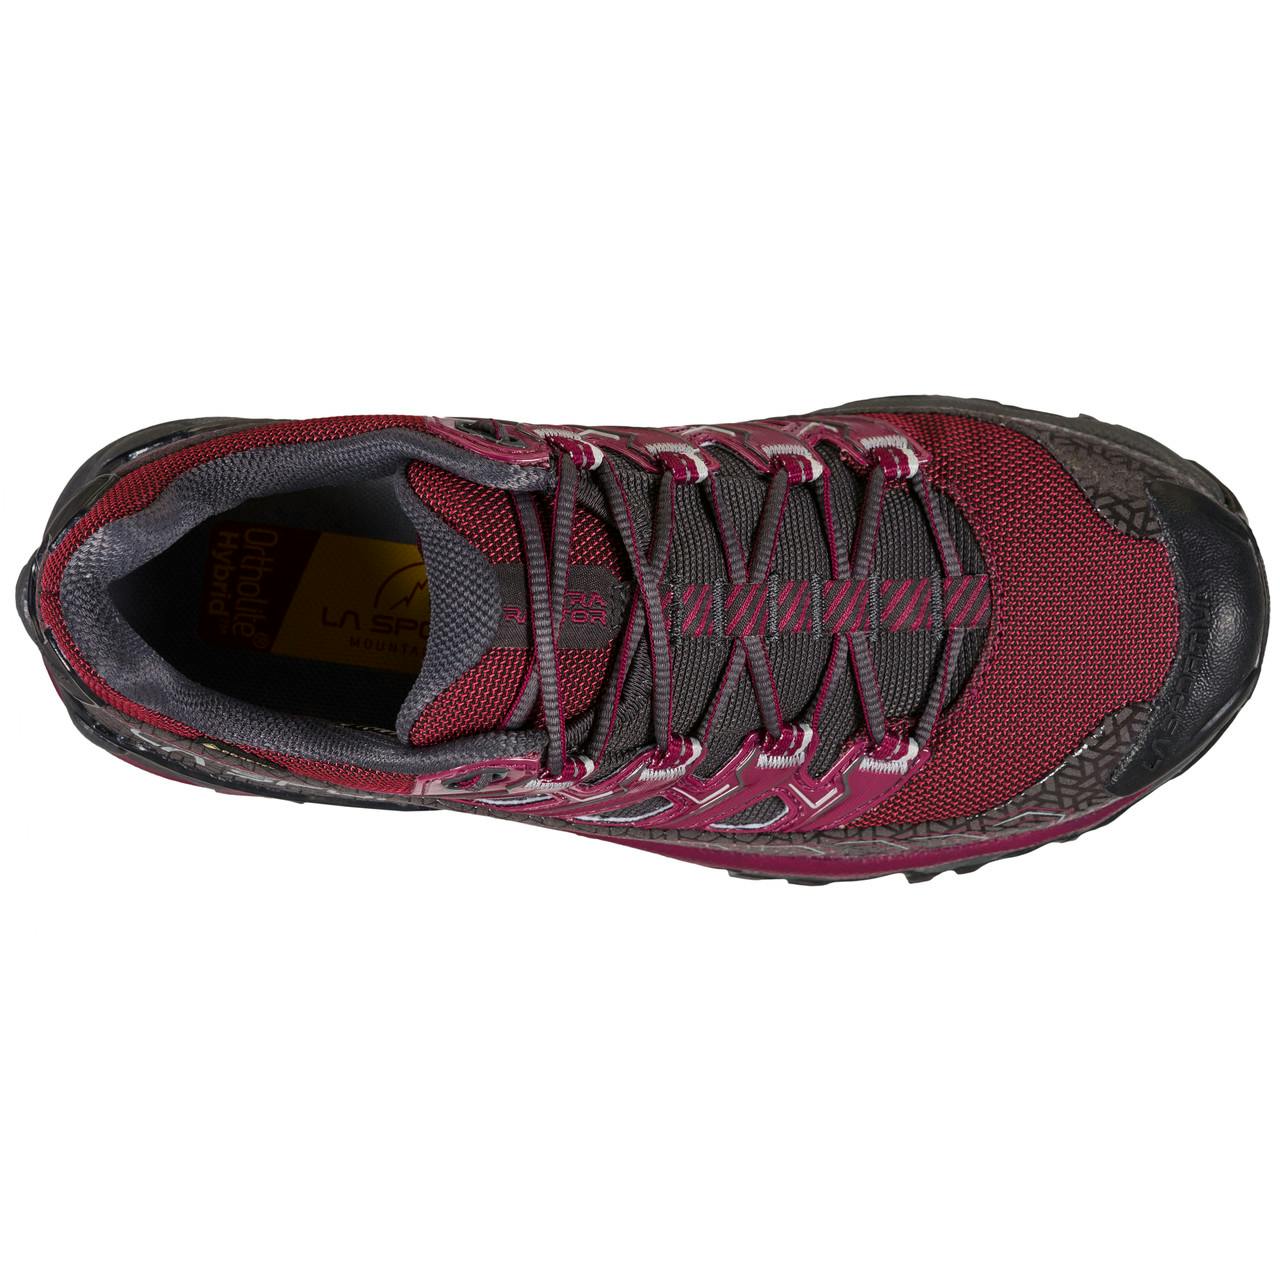 Ultra Raptor II Gore-Tex Trail Running Shoes Red Plum/Carbon